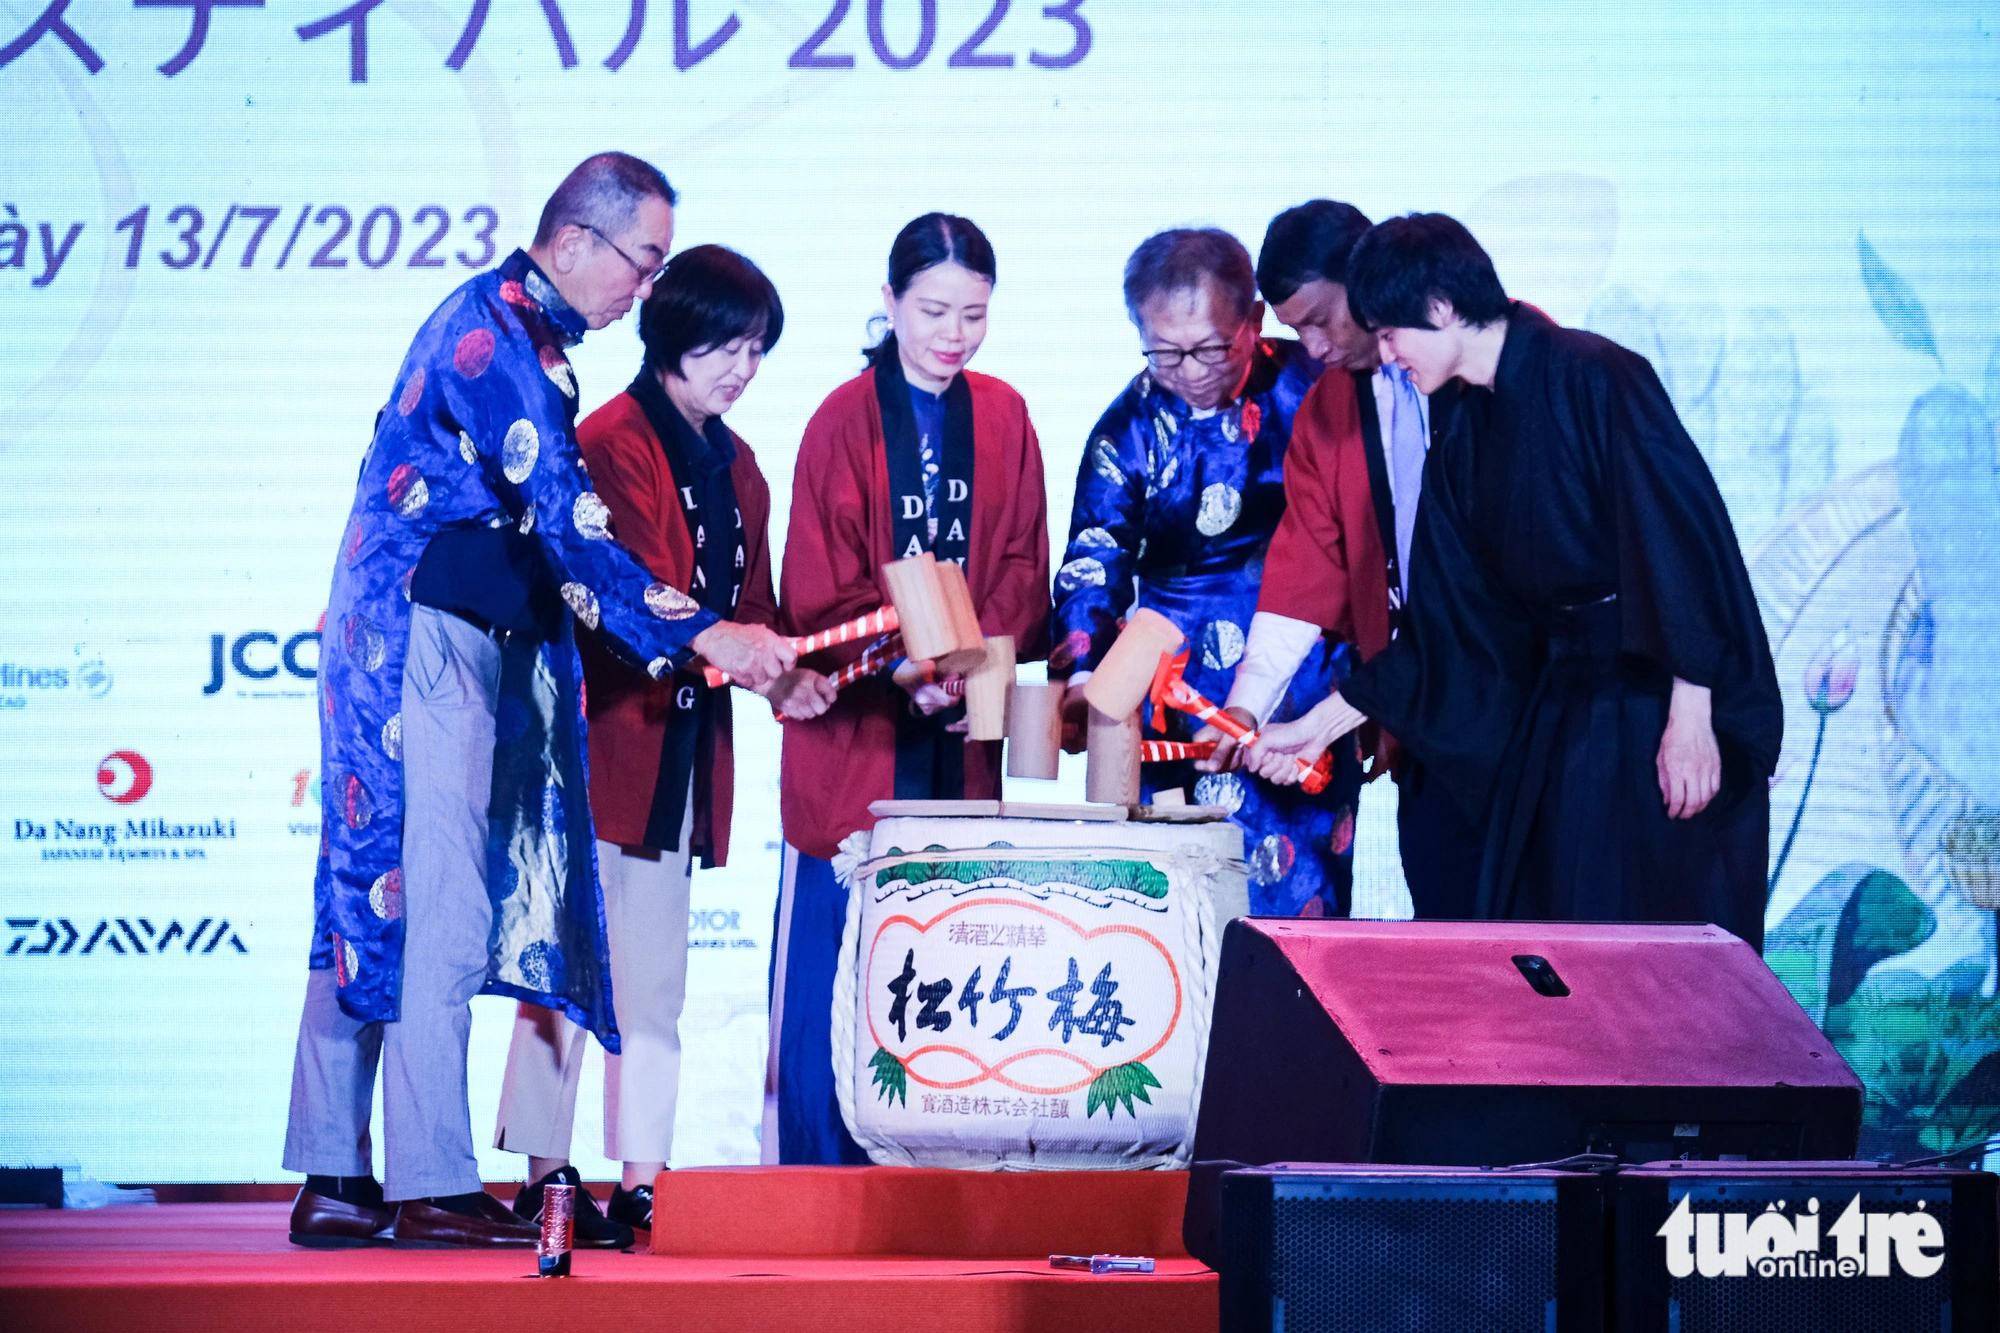 Delegates join the Kagami biraki ceremony, a traditional Japanese ceremony performed at events worthy of being celebrated, at the opening ceremony of the Vietnam-Japan Festival 2023. Photo: Tan Luc / Tuoi Tre